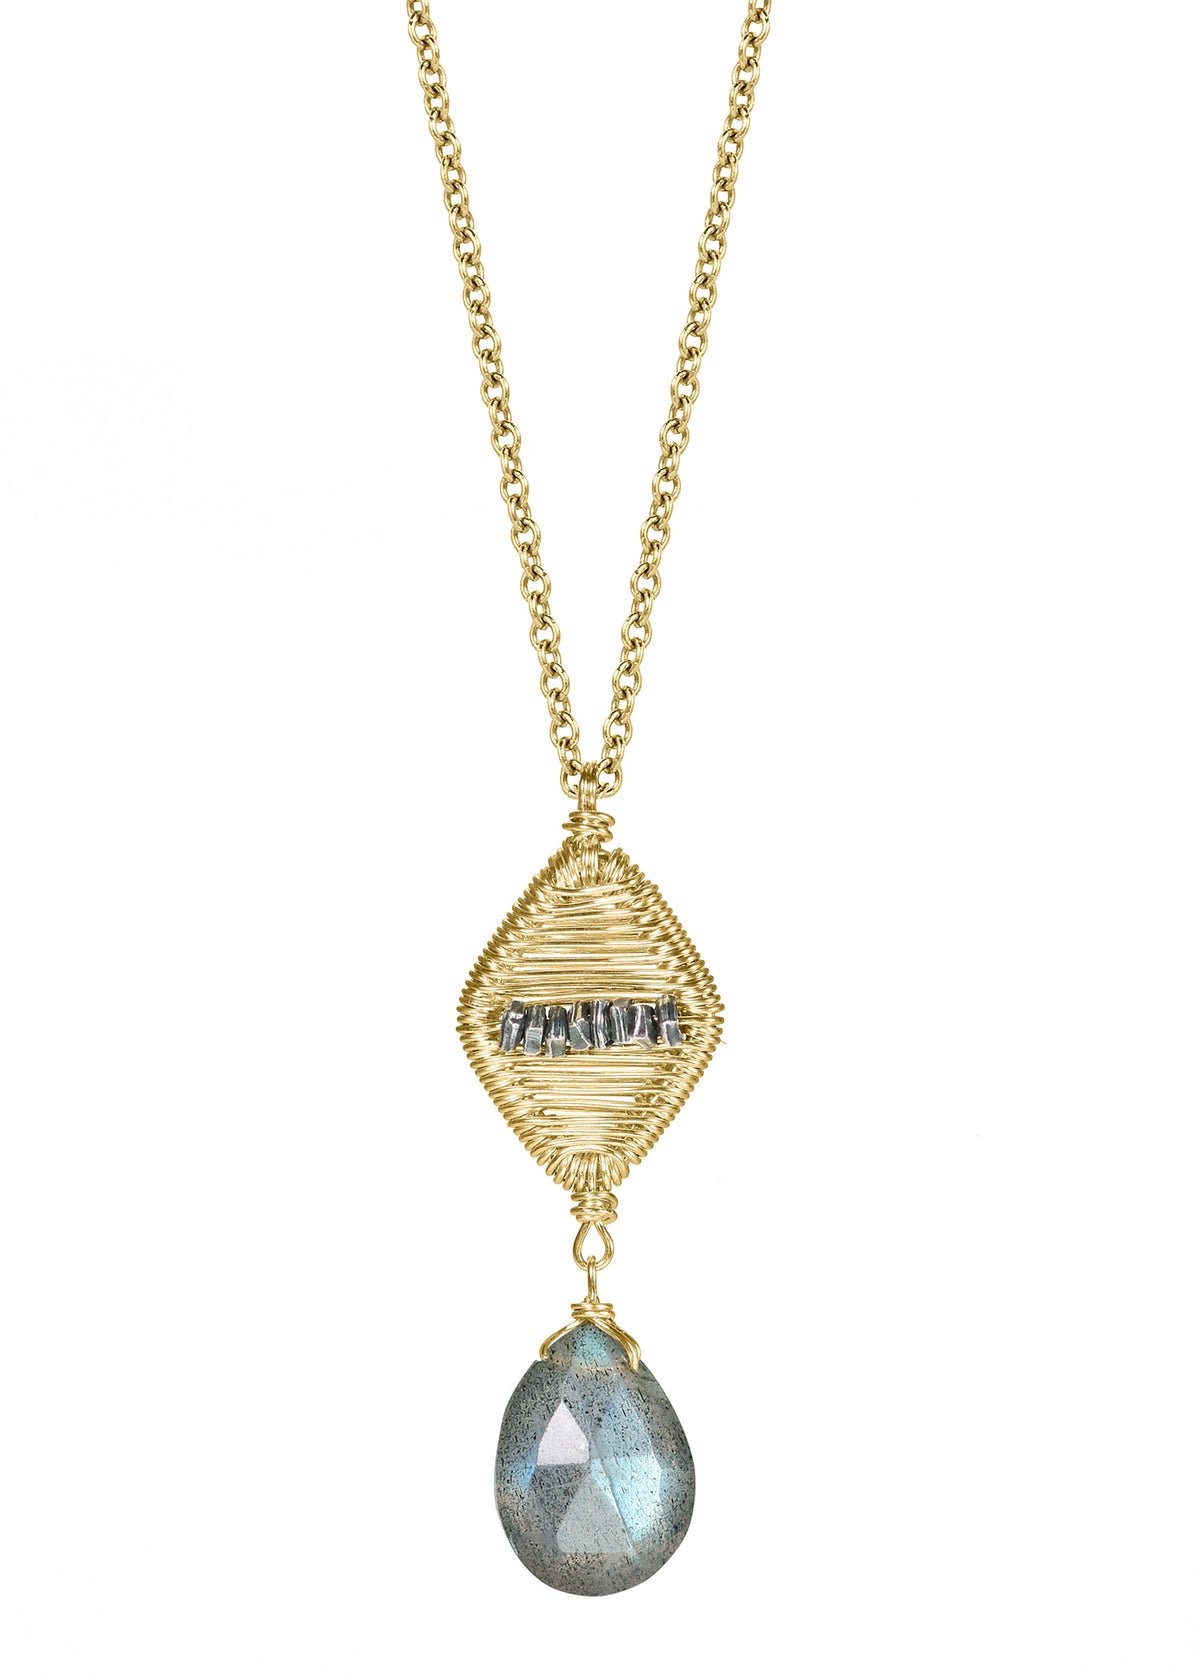 Labradorite 14k gold fill Sterling silver Mixed metal Necklace measures 17&quot; in length Pendant measures 1&quot; in length and 3/8&quot; in width at the widest point Handmade in our Los Angeles studio